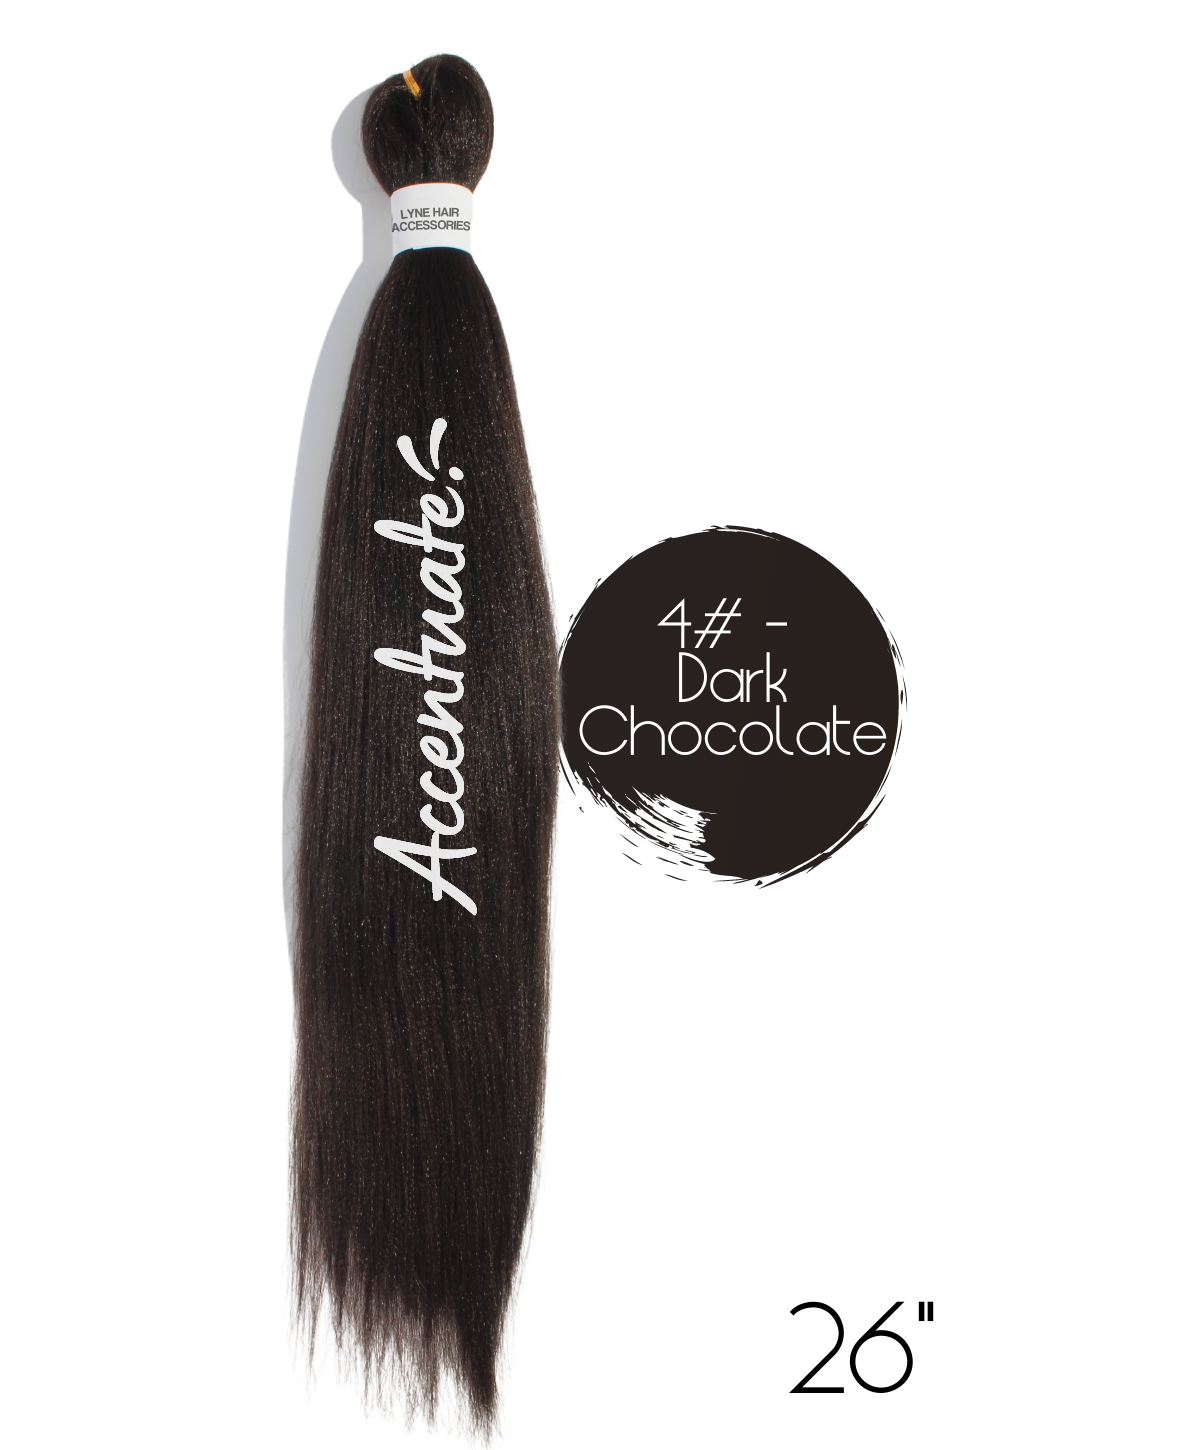 26" Plain 4# - Dark Chocolate Pre-Stretched Hair Extension